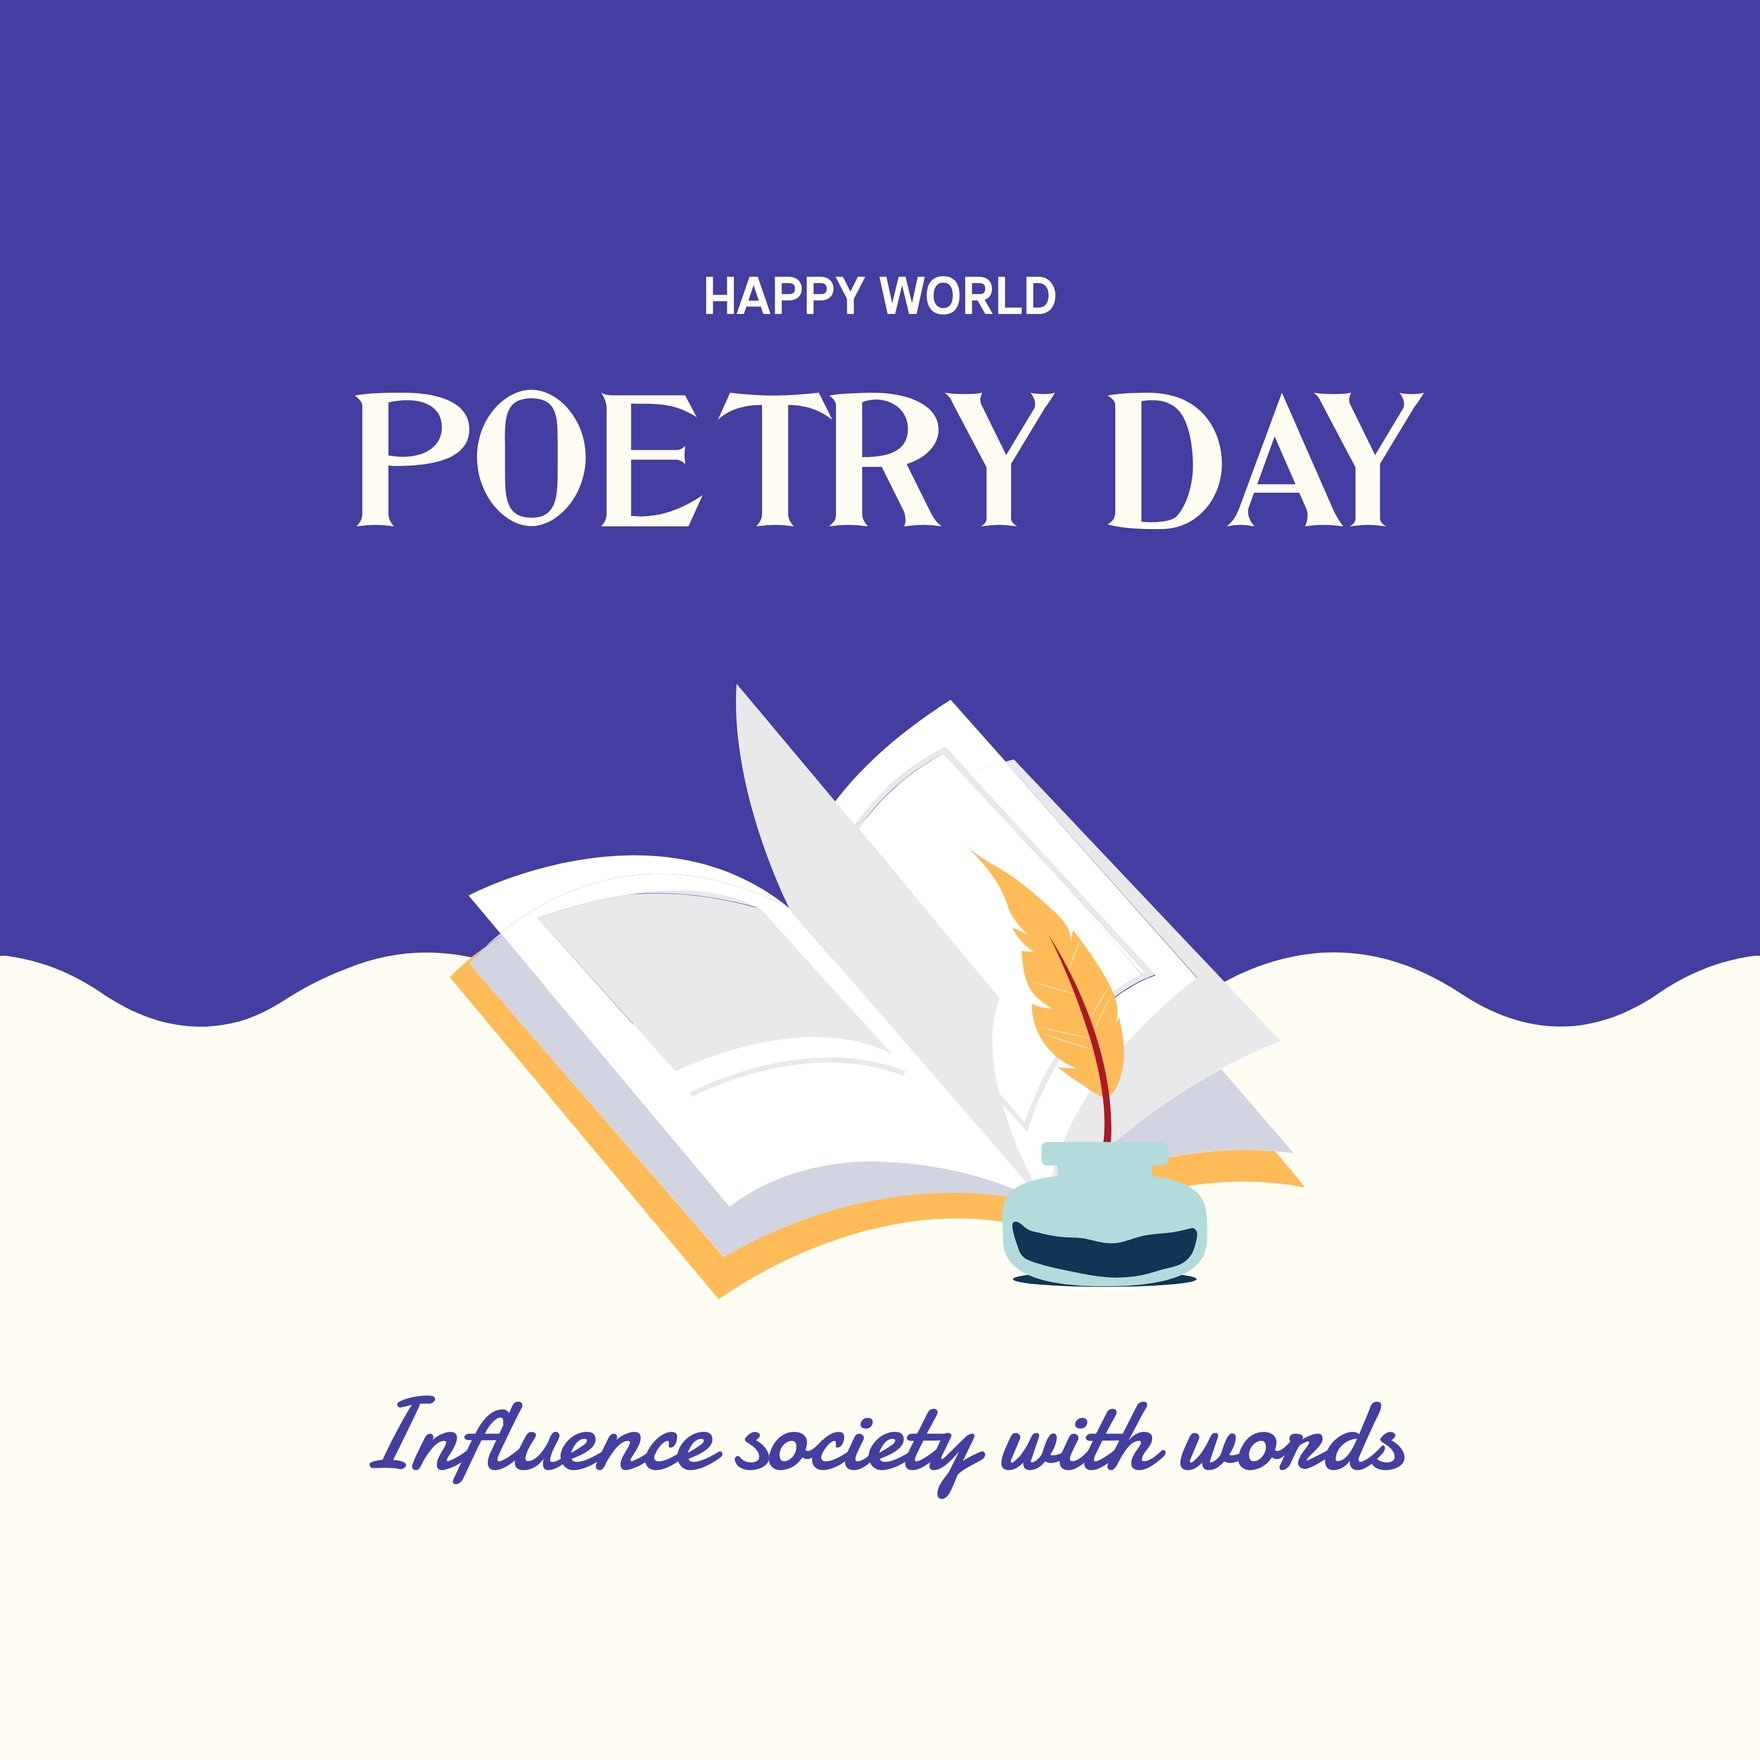 Free World Poetry Day Instagram Post